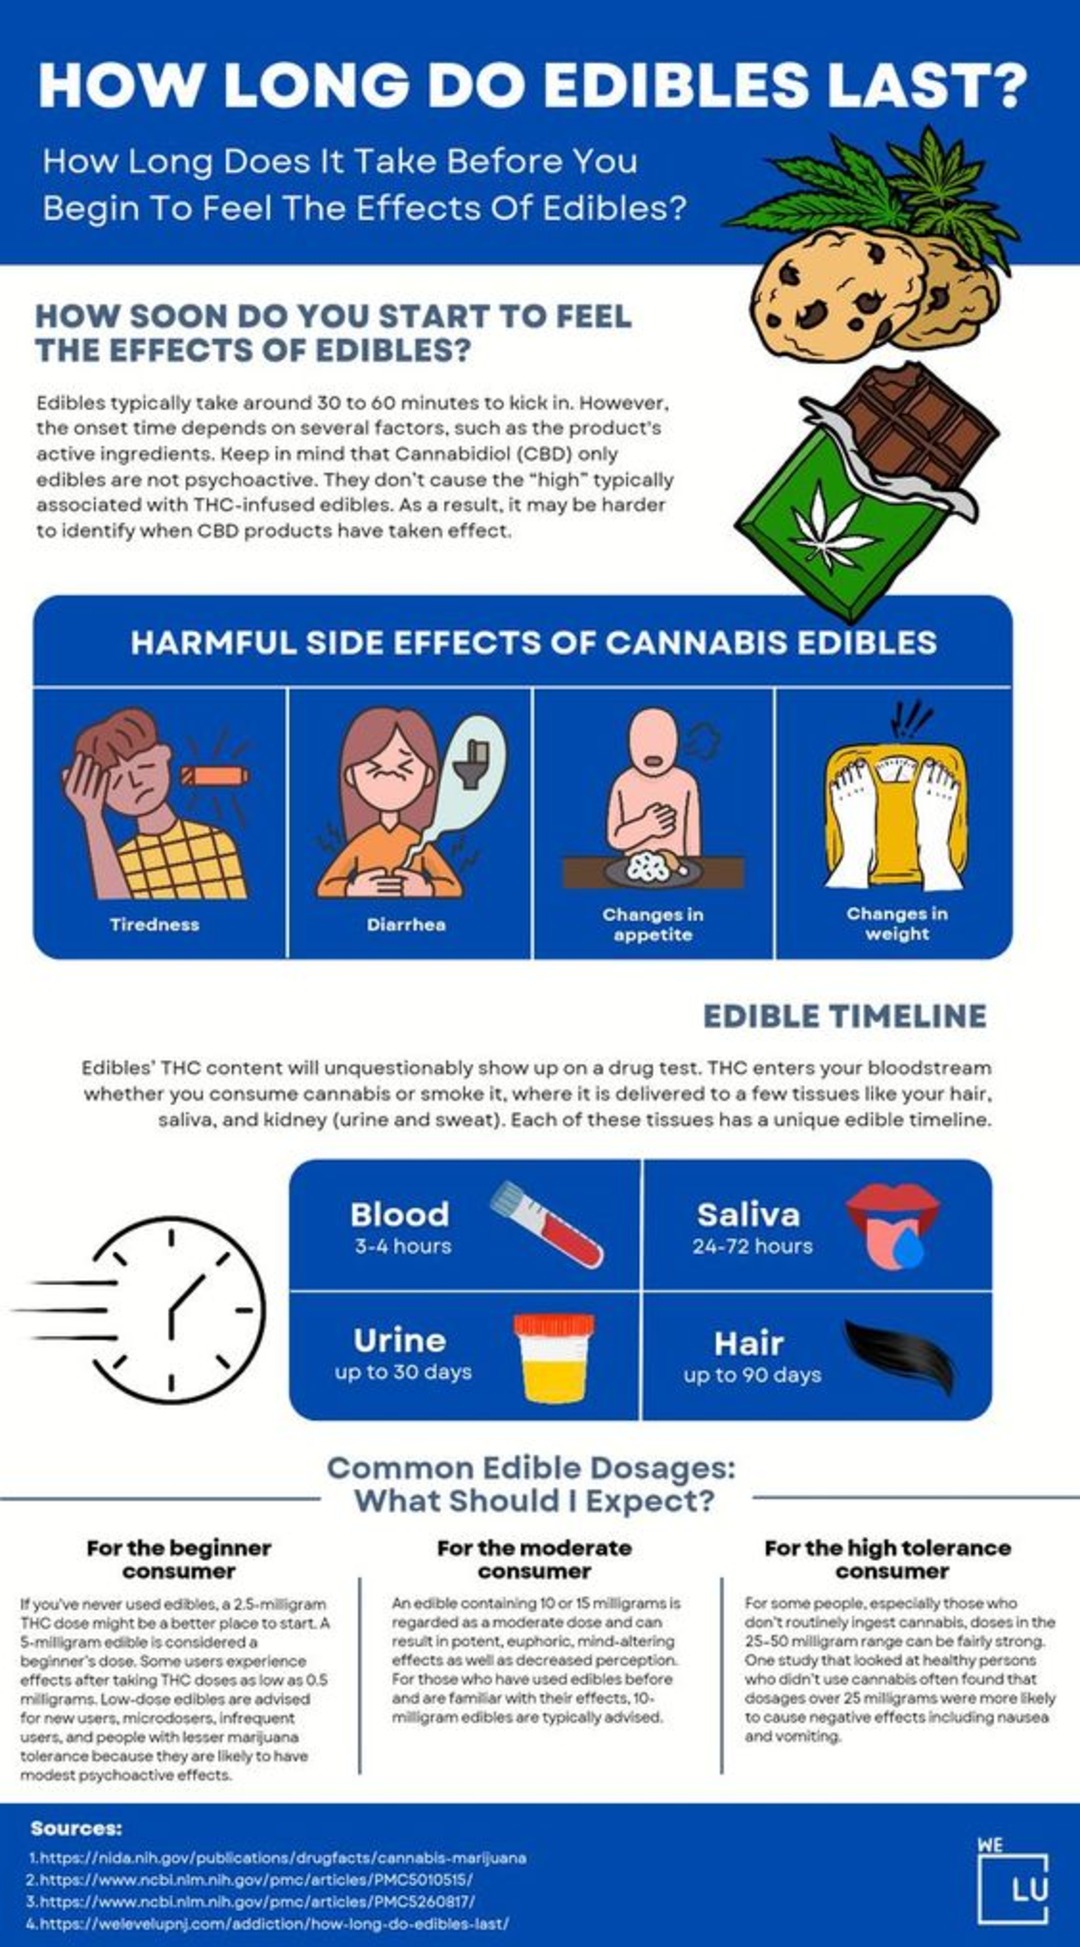 How long do edibles last? Many people feel the effects of edibles dissipate within 2 - 4 hours, some continue to feel high longer, for up to 12 - 24 hours after ingestion. On the balance, most edibles effects last from 4 - 8 hours.